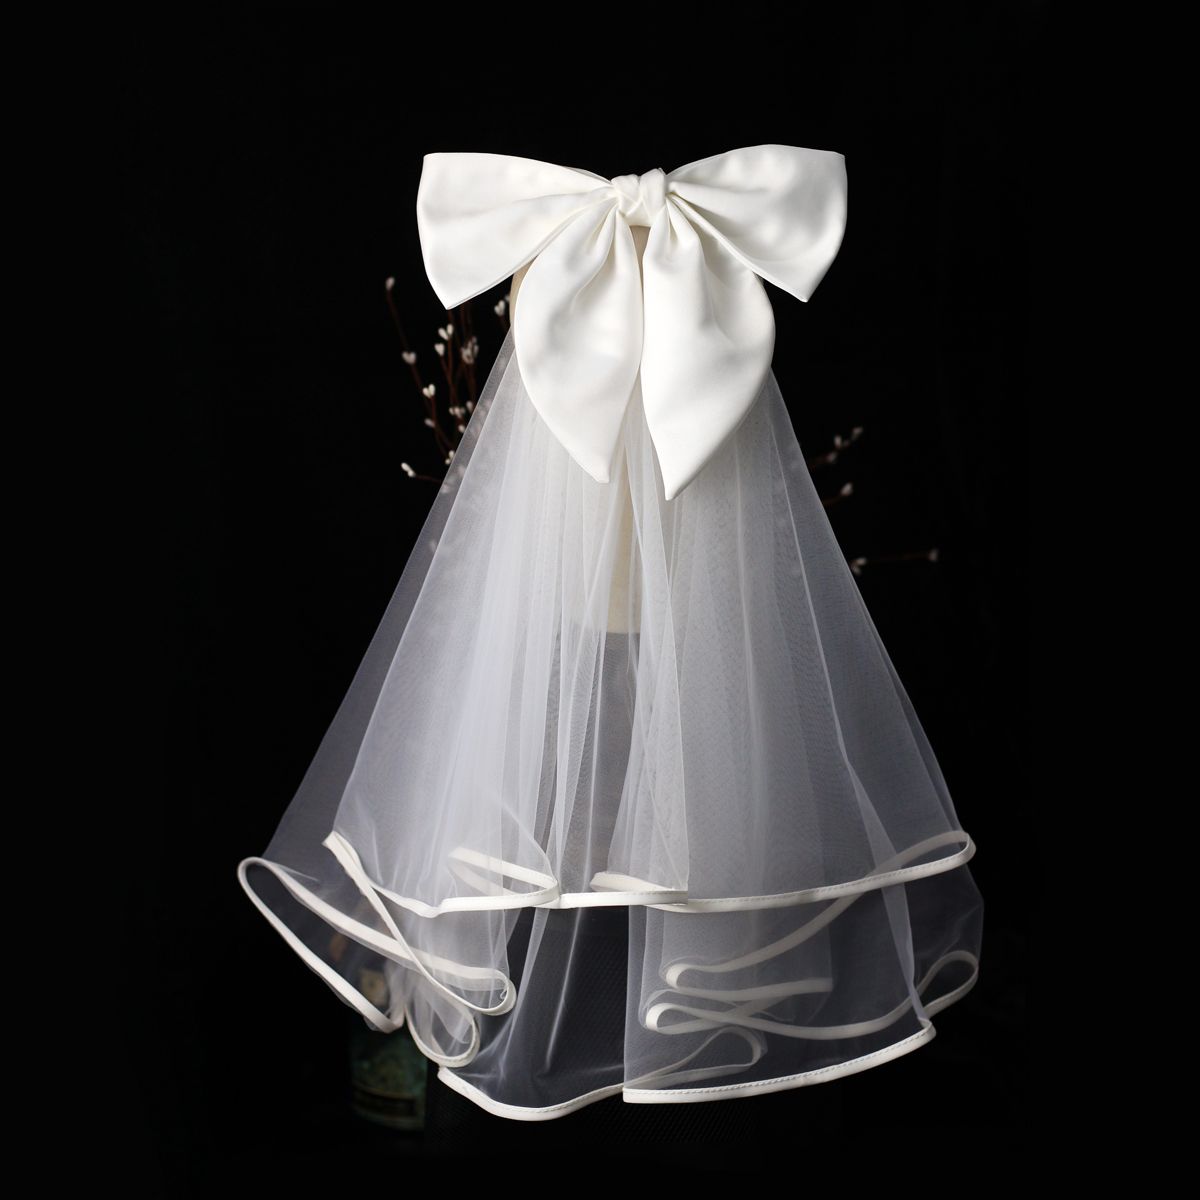 V693 Delicate Elbow Length Marriage Bride Veil 2-Layer Ribbon Edge Soft Tulle Satin Bowknot White Wedding Bridal Headdress with Comb